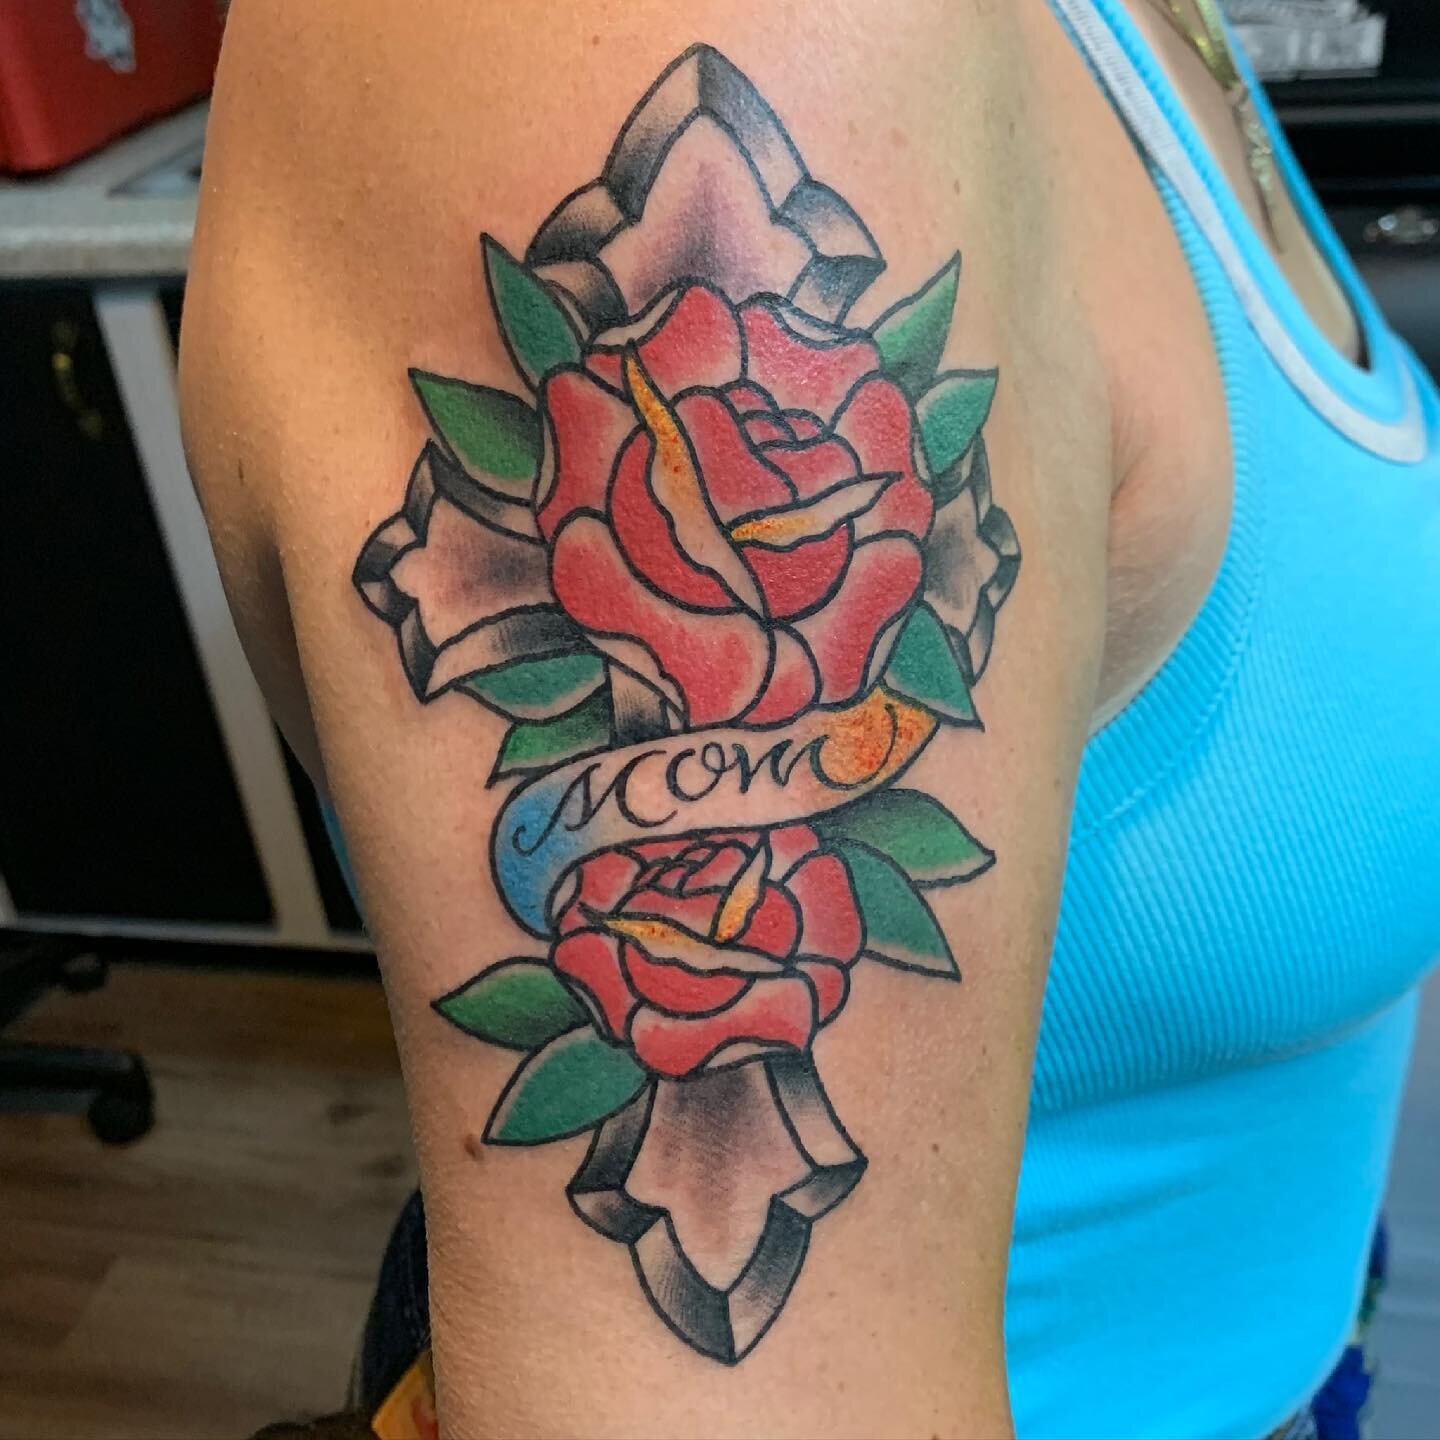 Cross and rose combo done by @somervillen 
*
Andrew does all his bookings via DMs or email, DMs preferred! 
*
andrewwoodbury@hotmail.com
*
#supportgoodtattooing&nbsp;#bostontattoo&nbsp;#supportlocalartists&nbsp;#tattooistartmag&nbsp;##boldwillhold #b